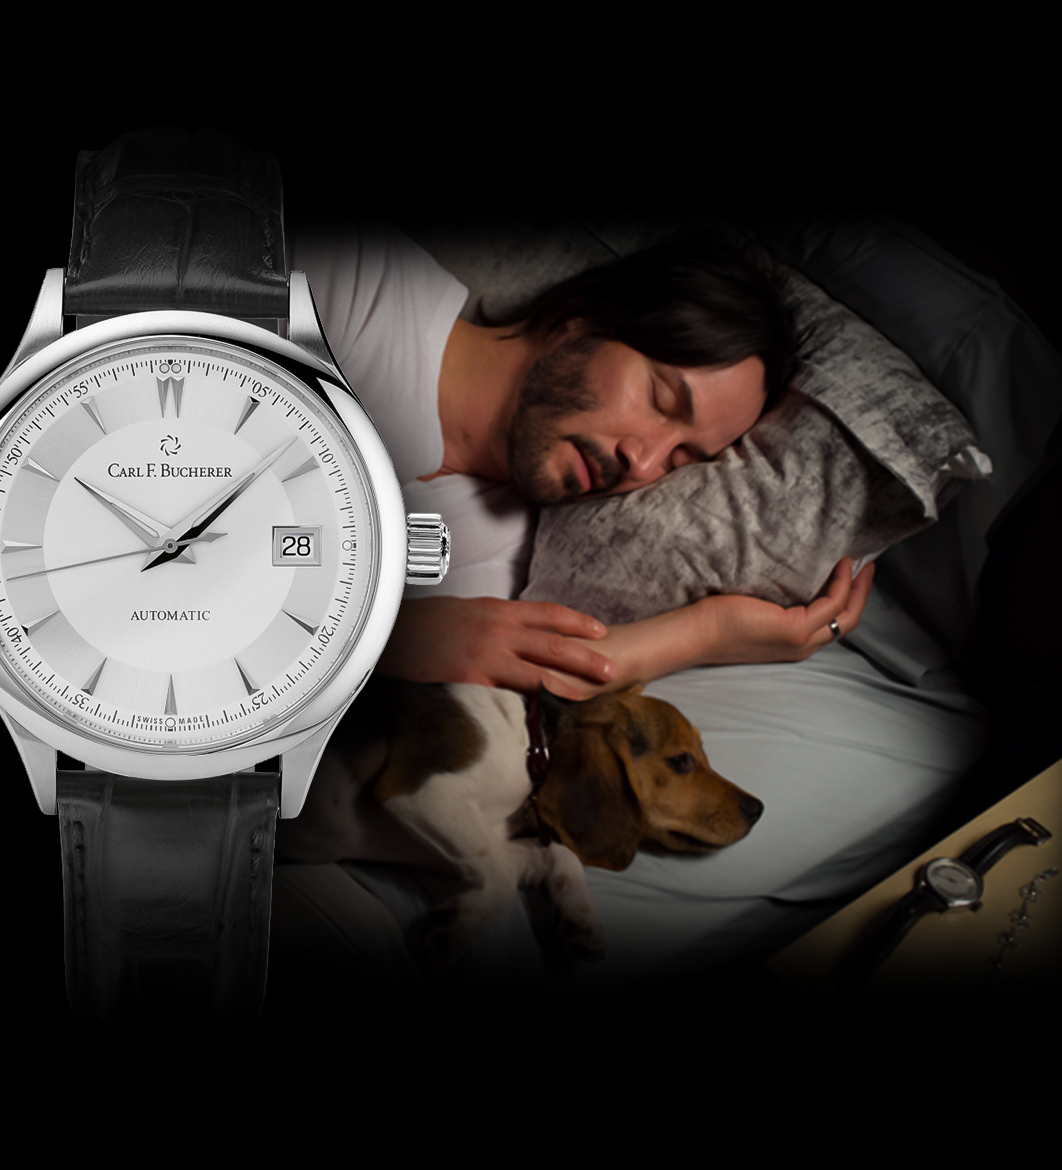 Carl F. Bucherer Timepieces Featured in John Wick: Chapter 2